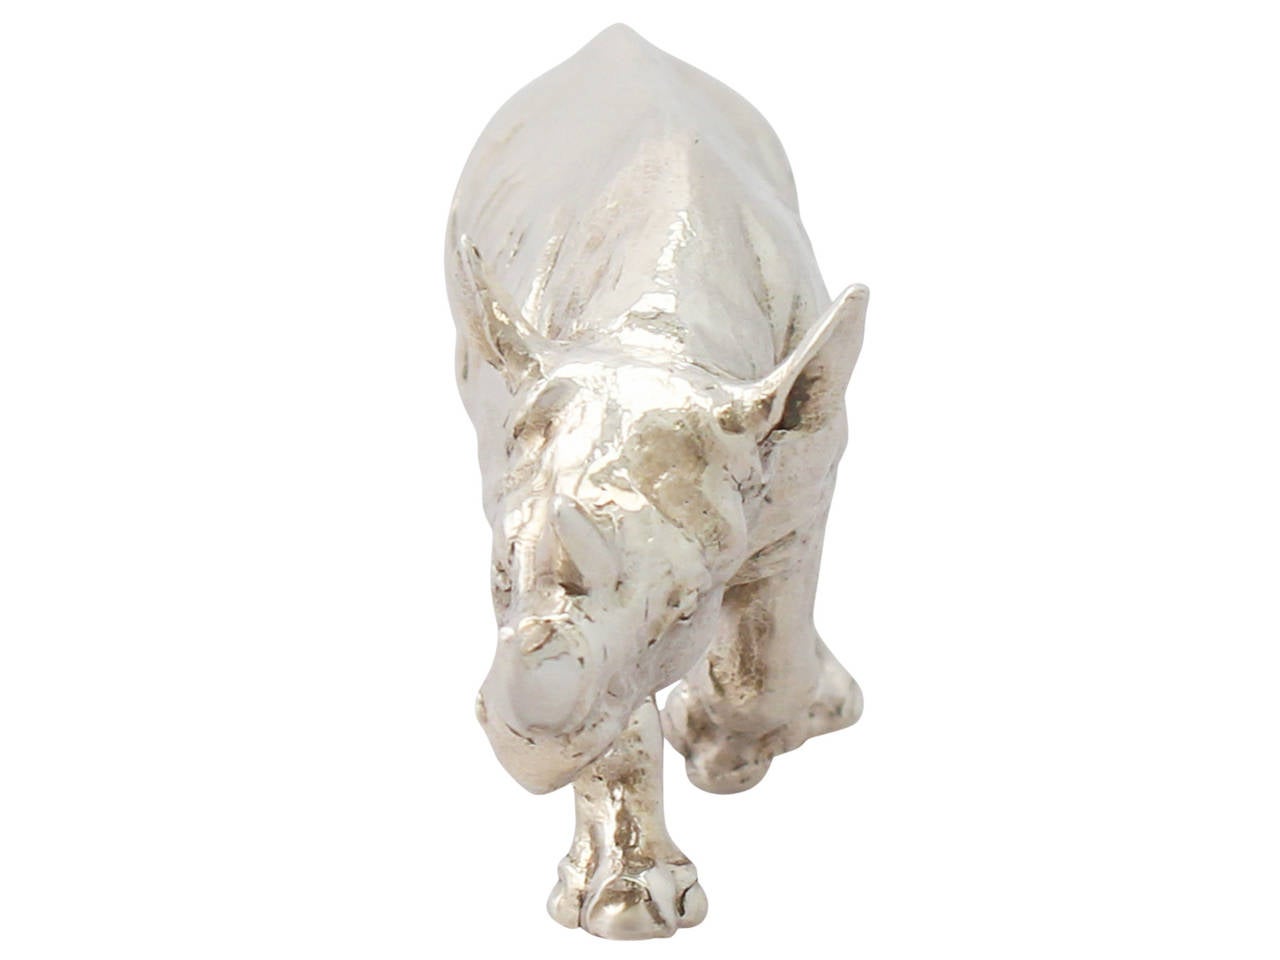 English Contemporary Sterling Silver Model of a Rhinoceros, 2011